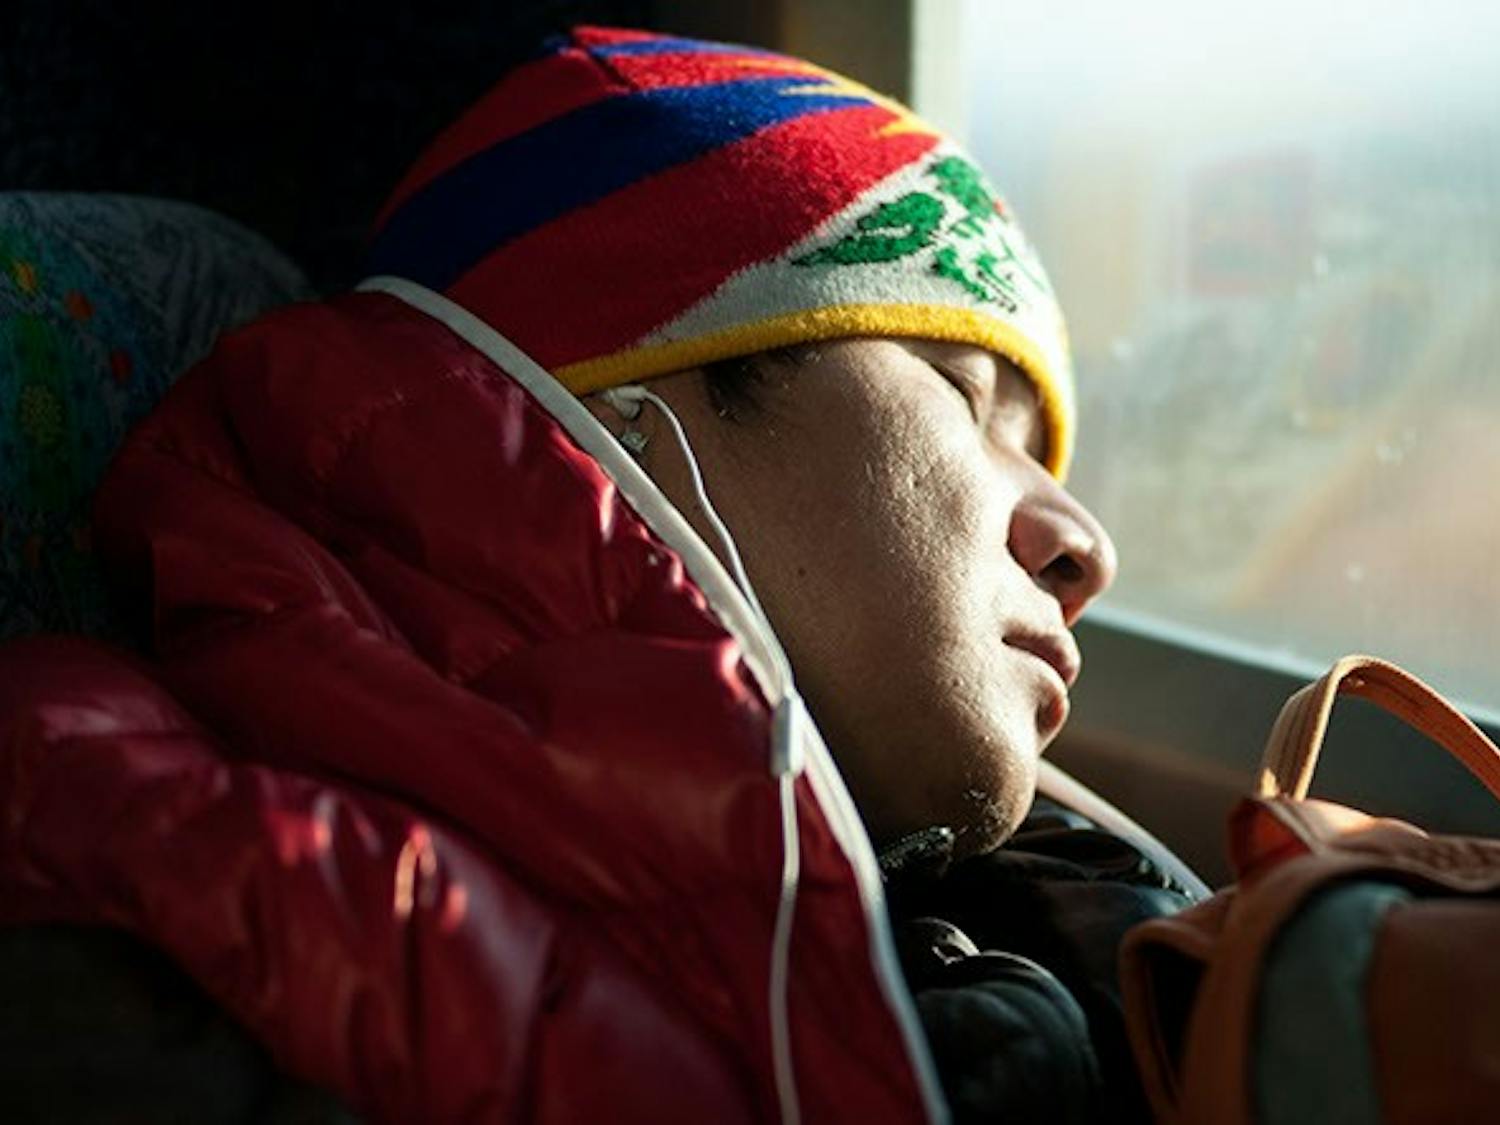 Photos: Tibetans from the Midwest take protests to Iowa